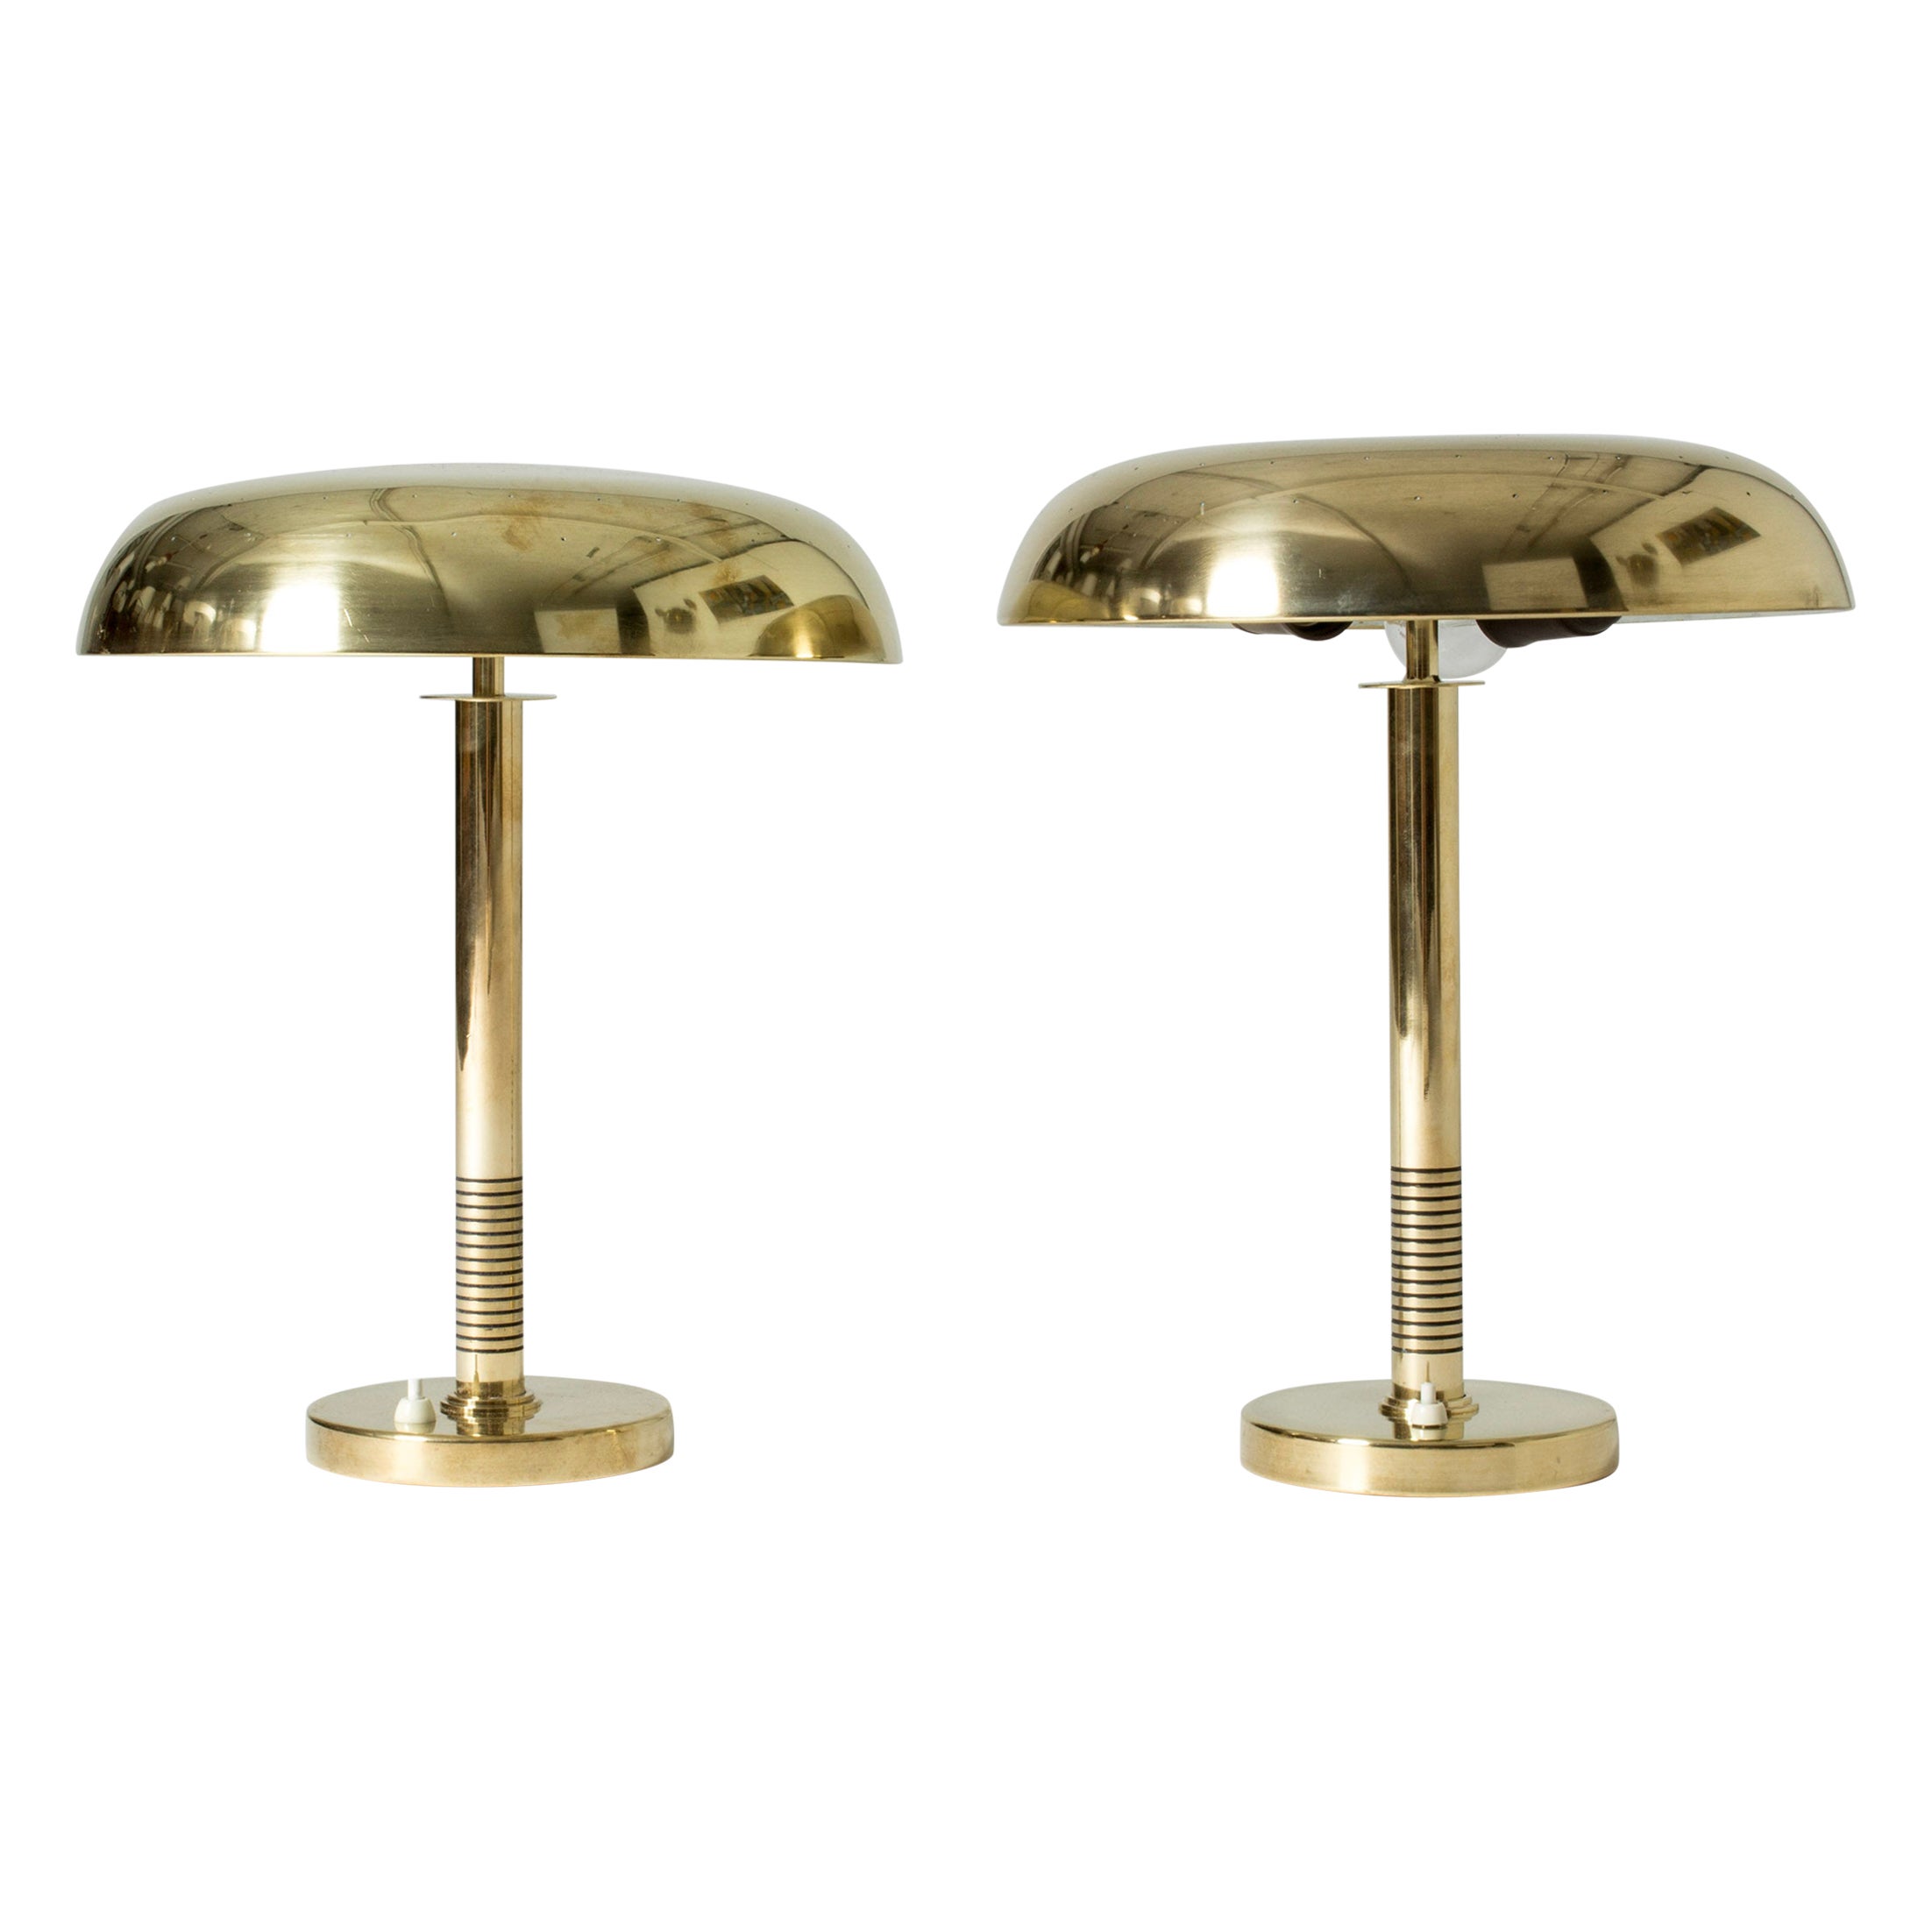 Midcentury Modern Brass Table Lamps, Boréns, Sweden, 1950s For Sale